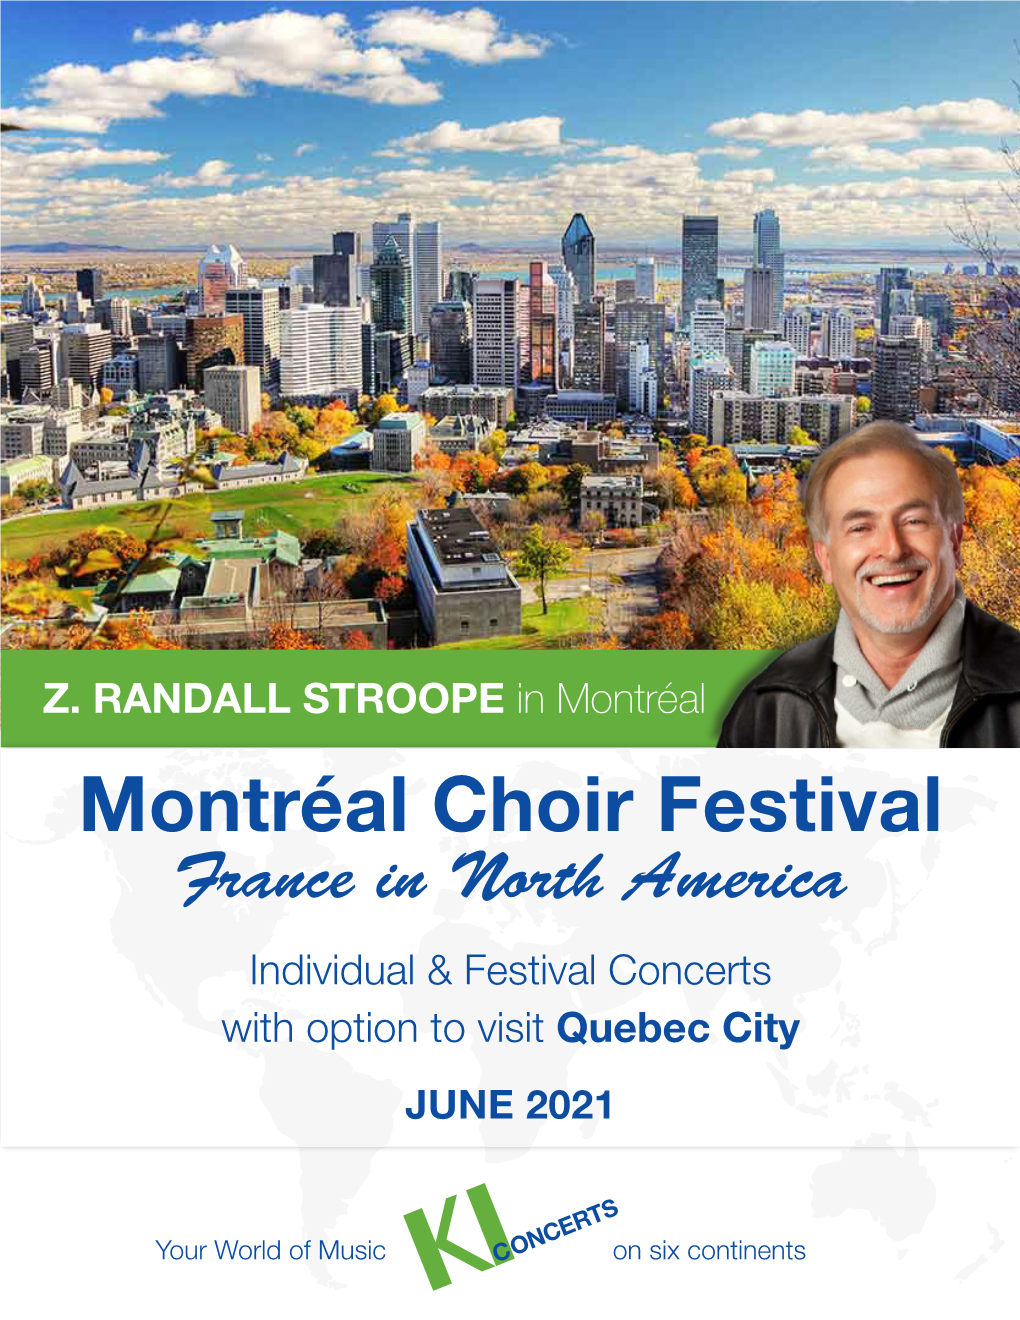 Montréal Choir Festival France in North America Individual & Festival Concerts with Option to Visit Quebec City JUNE 2021